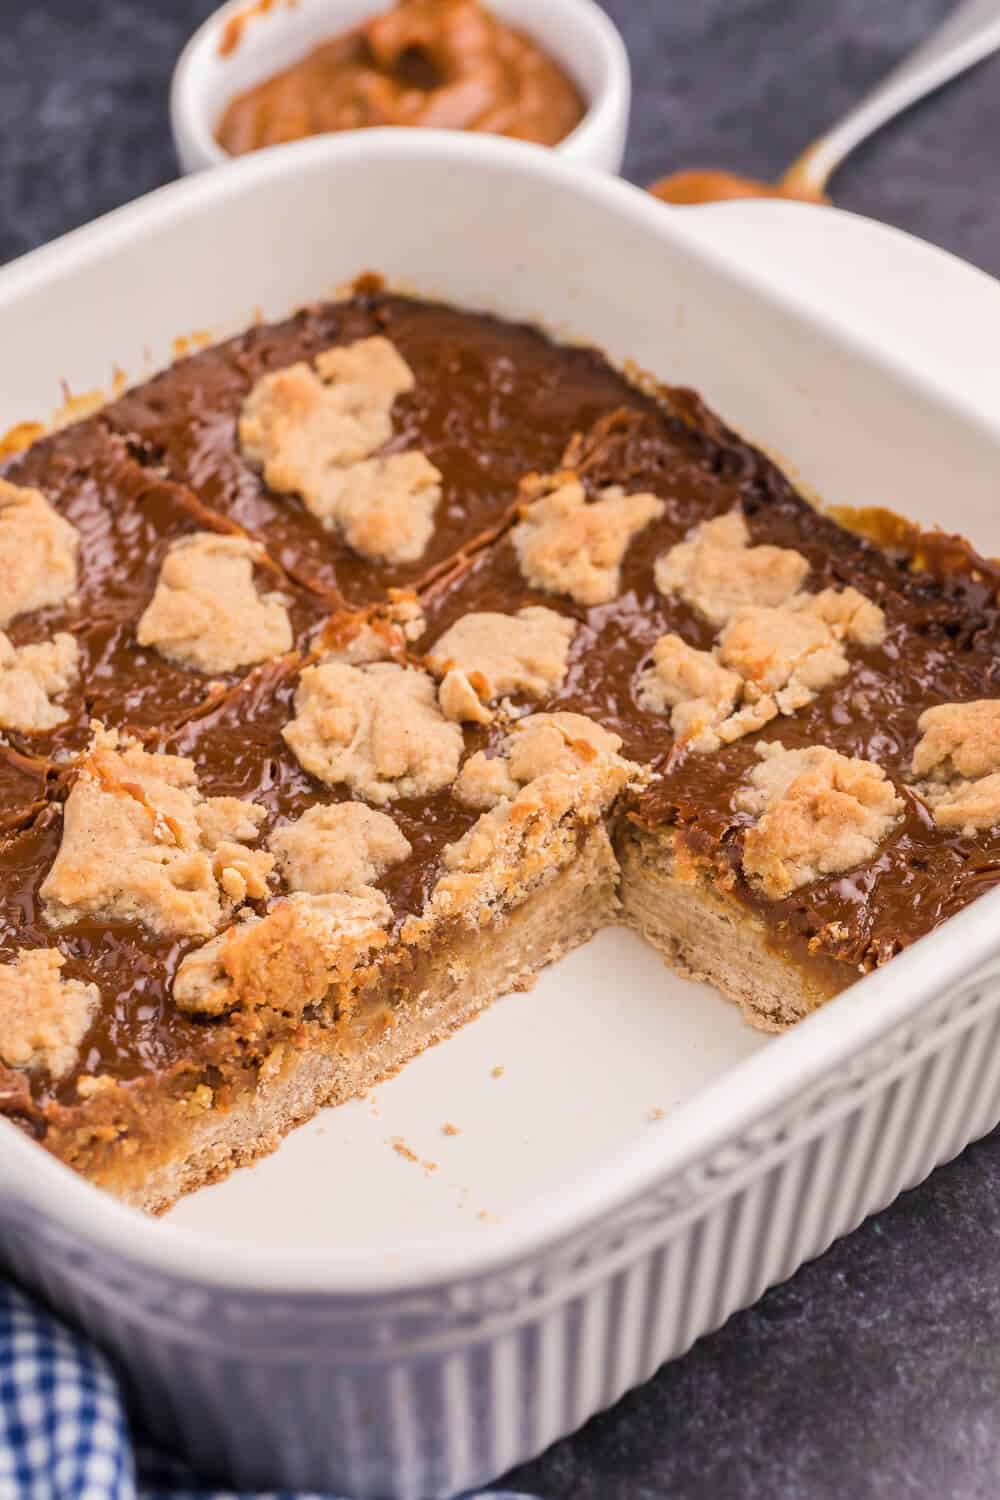 Dulce de Leche bars in the baking pan with a few pieces removed.